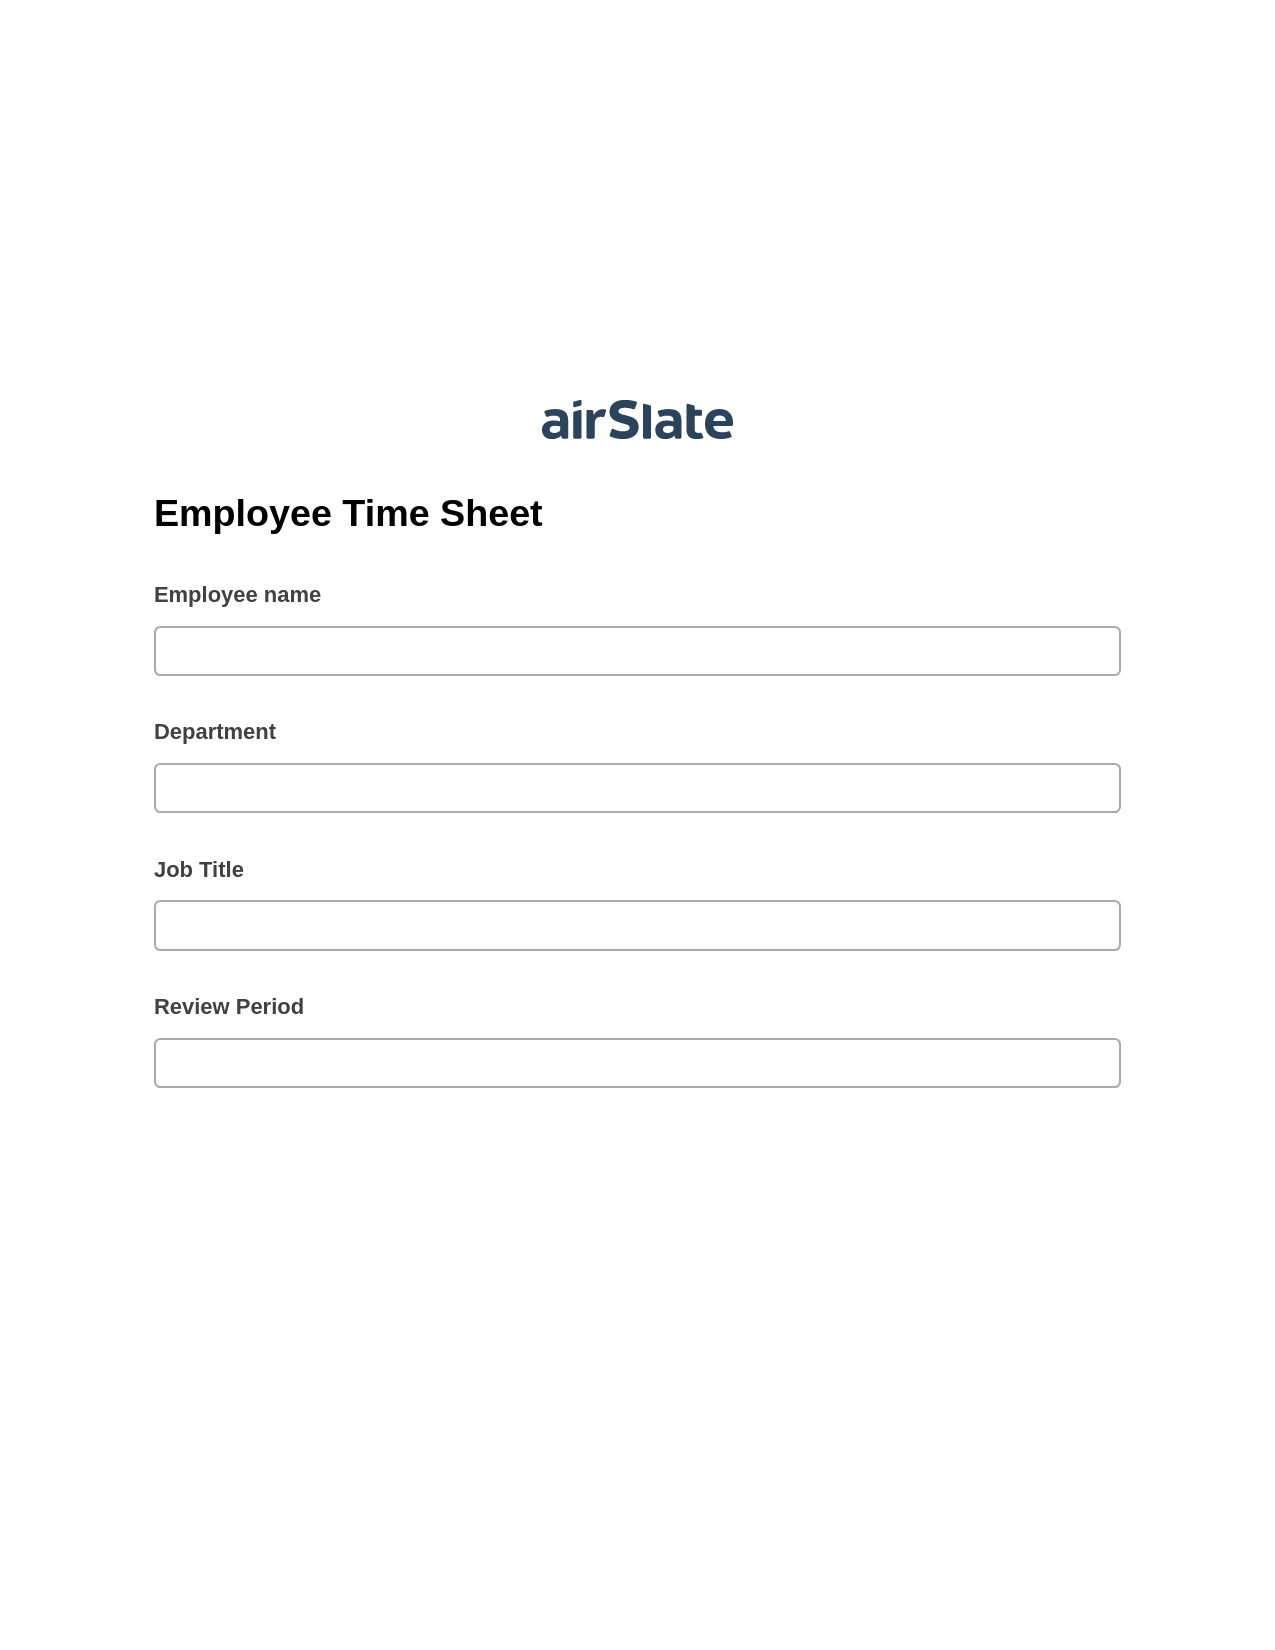 Employee Time Sheet Pre-fill Dropdowns from Airtable, Lock the Slate Bot, Archive to OneDrive Bot